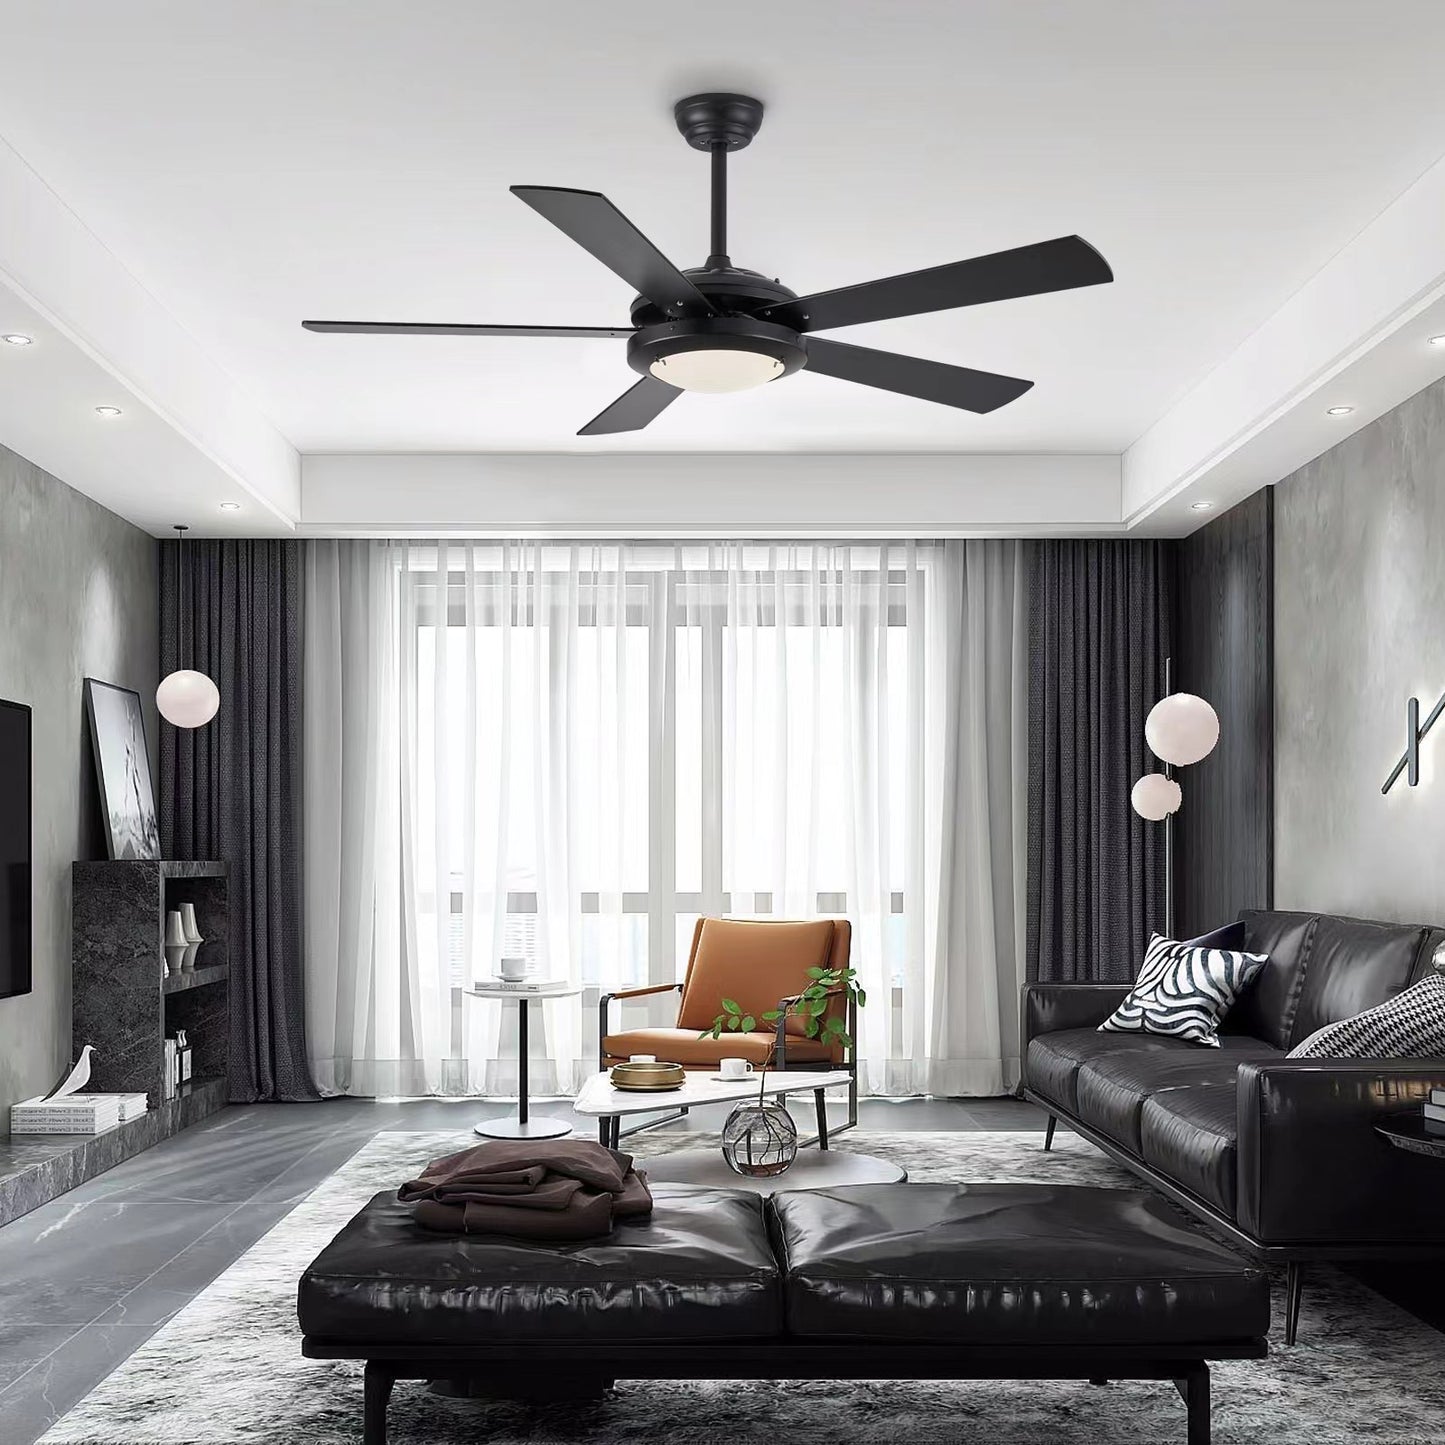 Classical and modern combination of living room bedroom dining room fan light